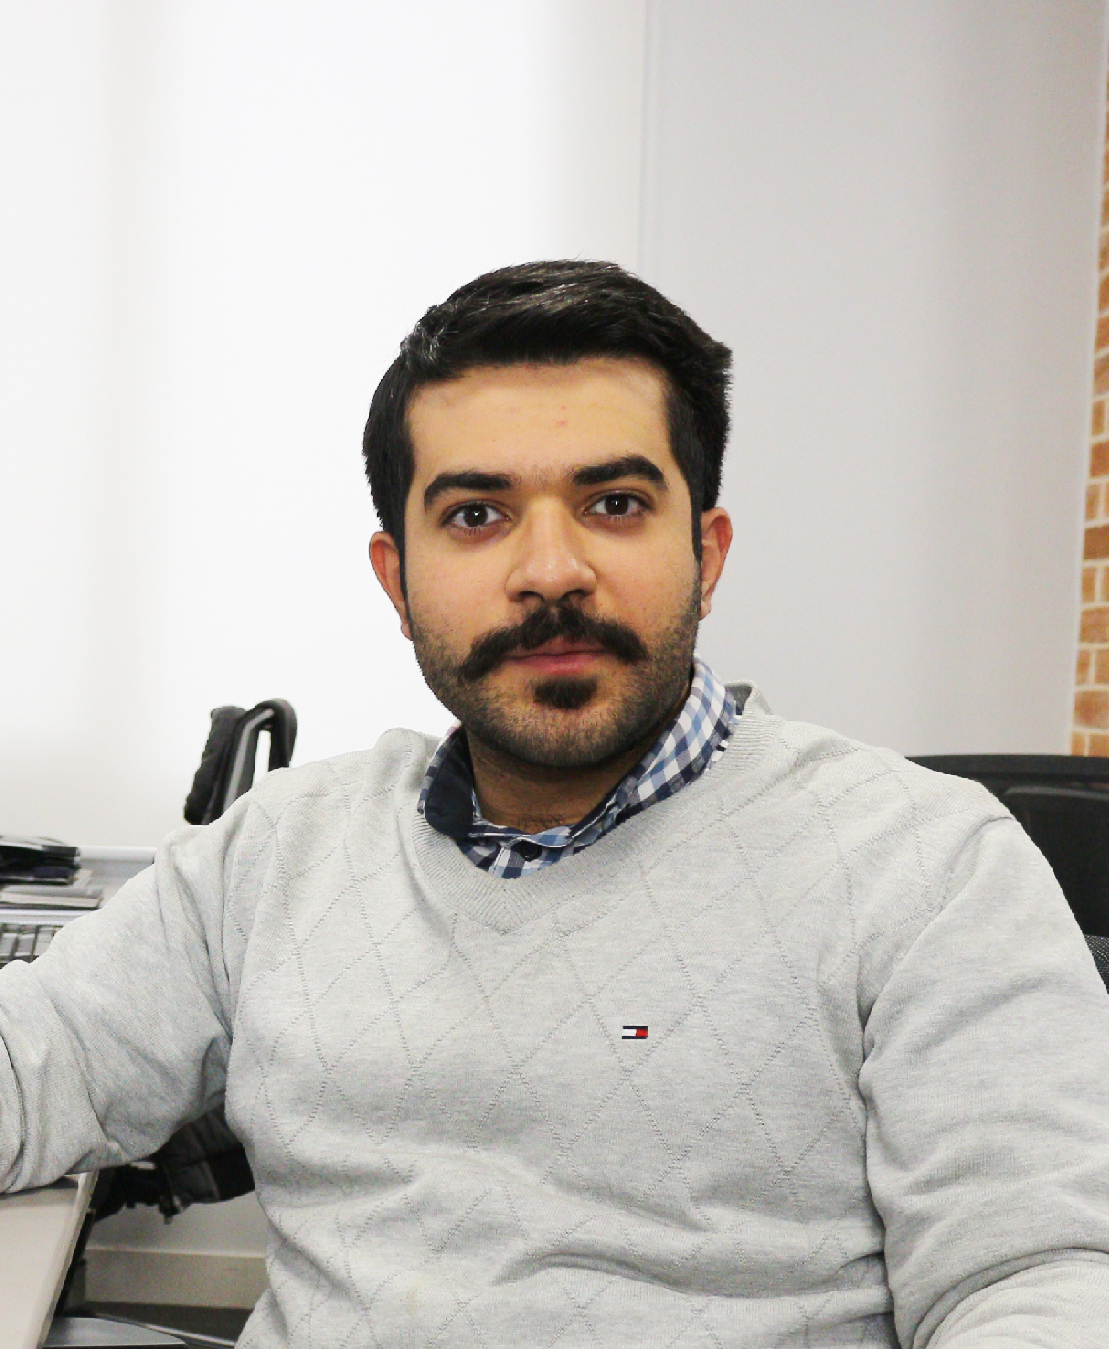 Hossein Aghahosseini Software Architect at Web Developement Company